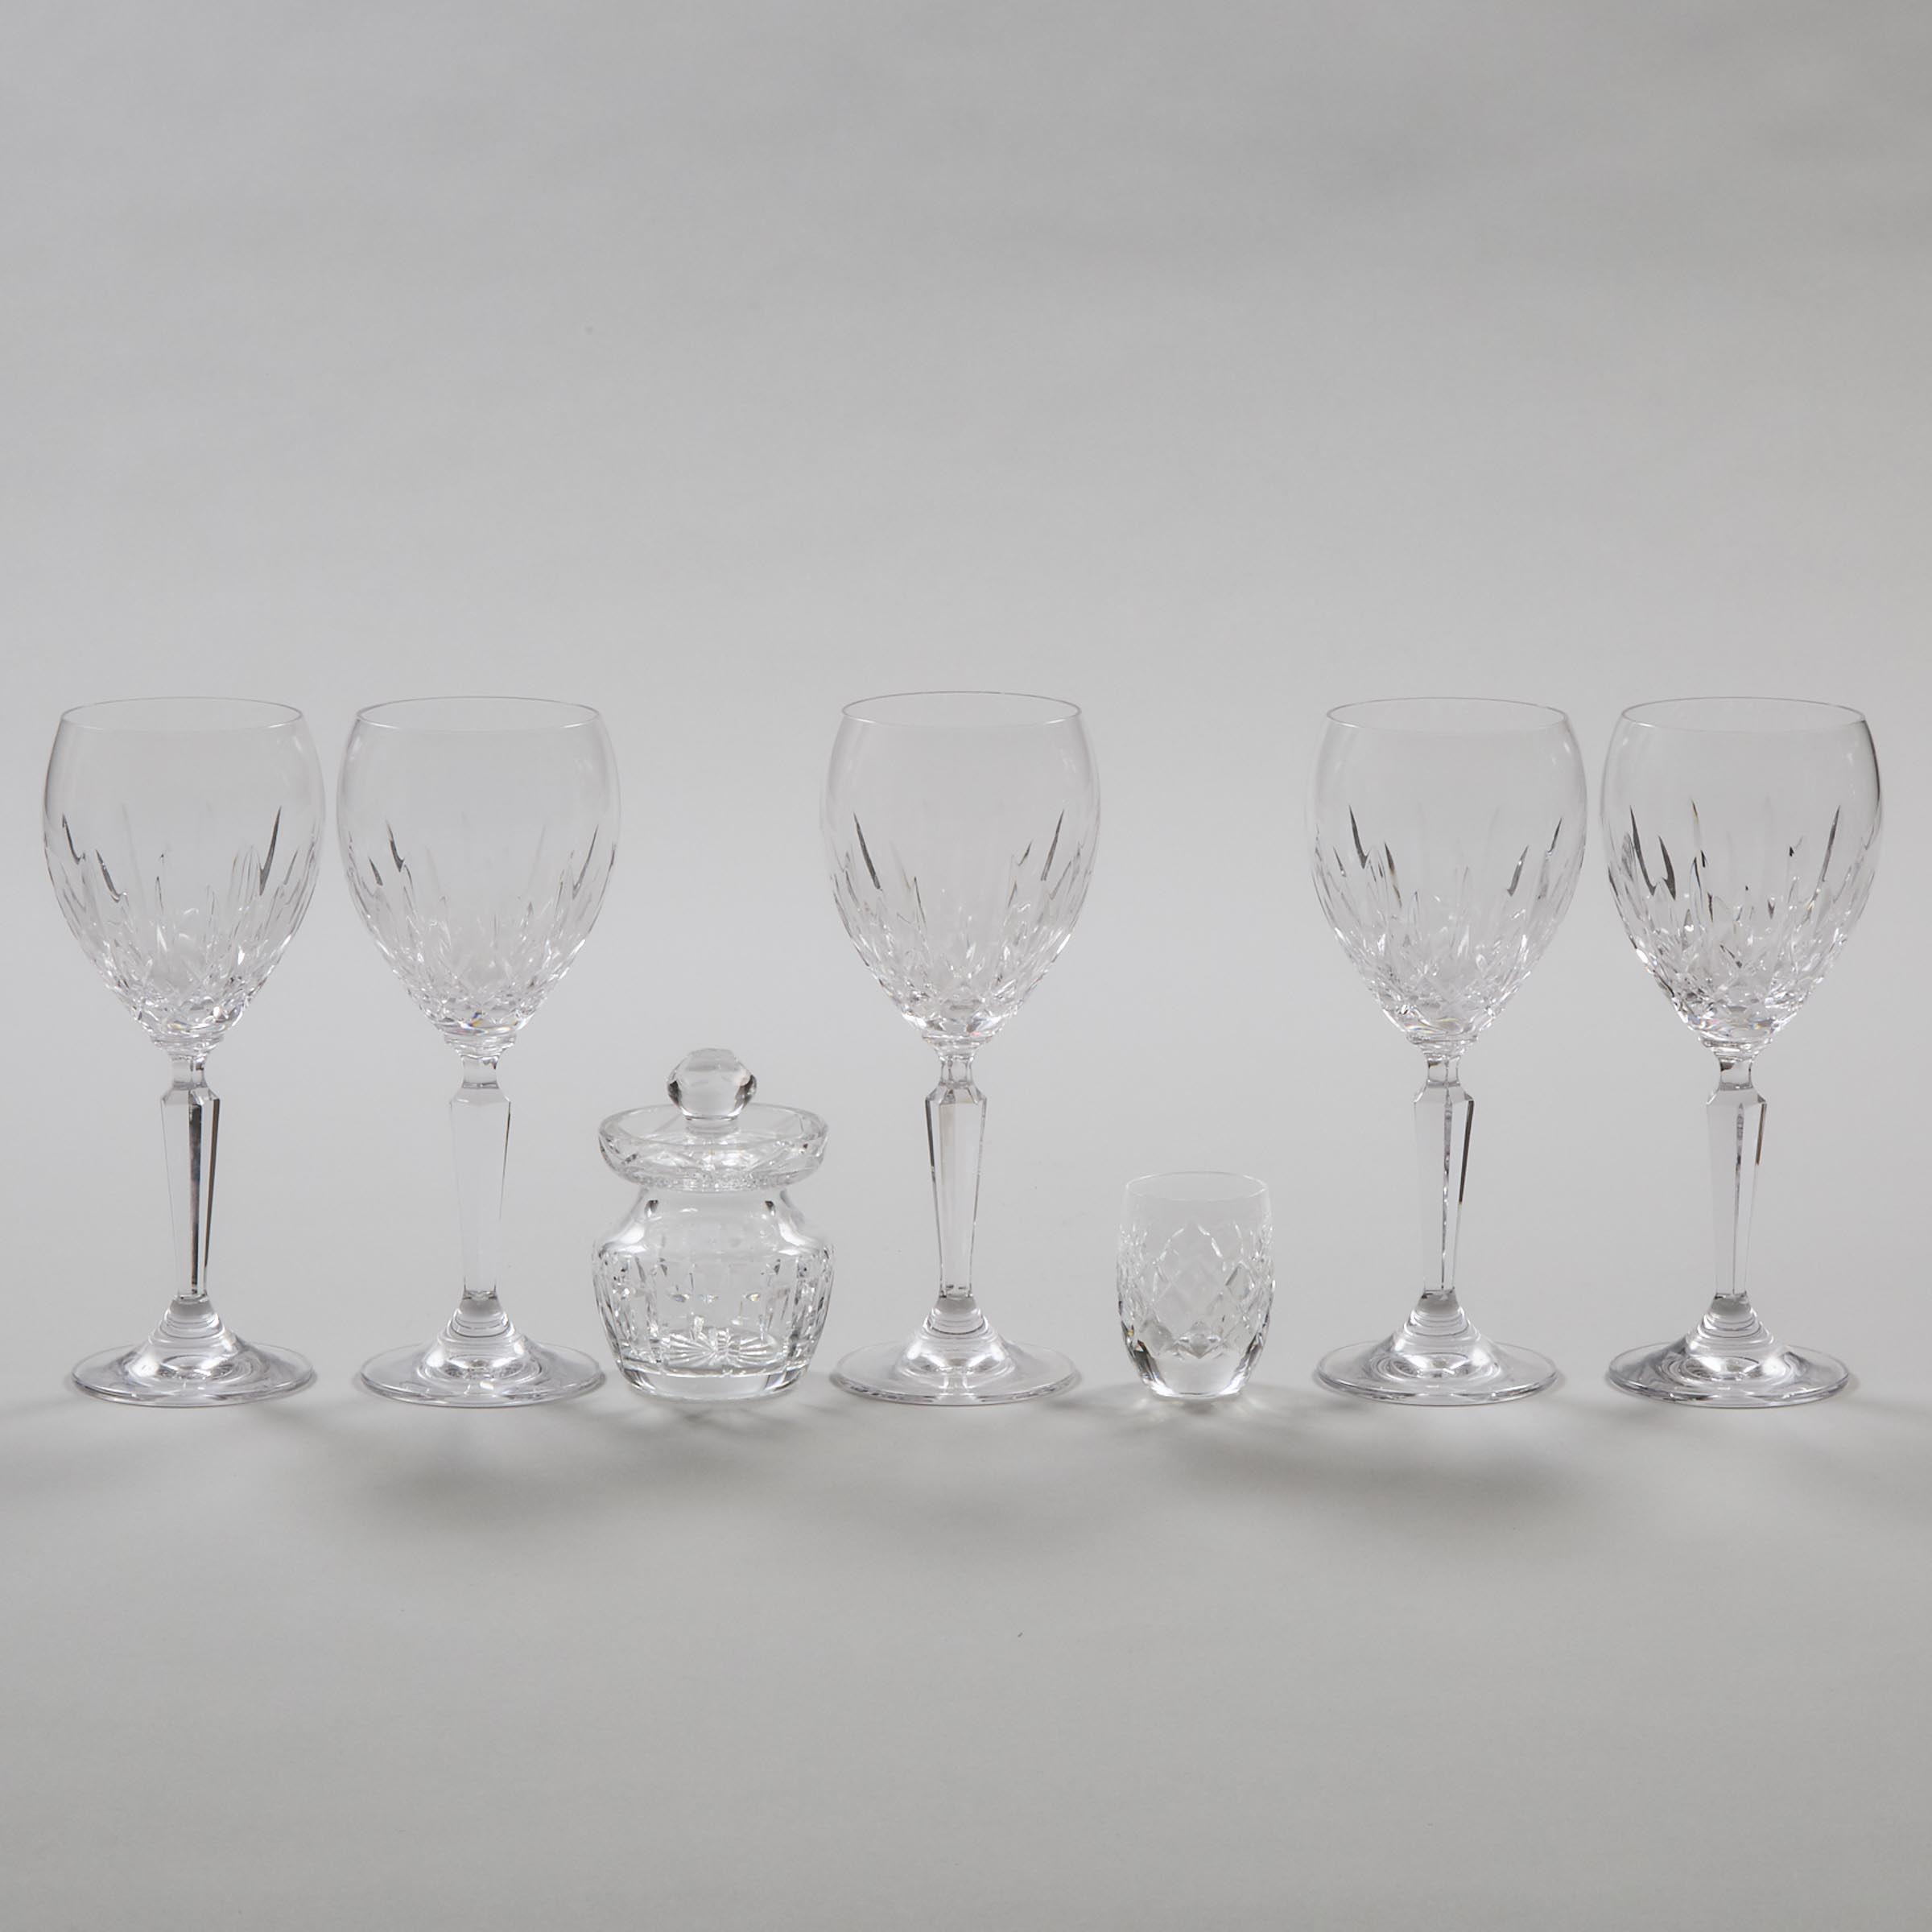 Five Waterford 'Lismore' Wine Glasses, Covered Jar, and a Shot Glass, 20th century